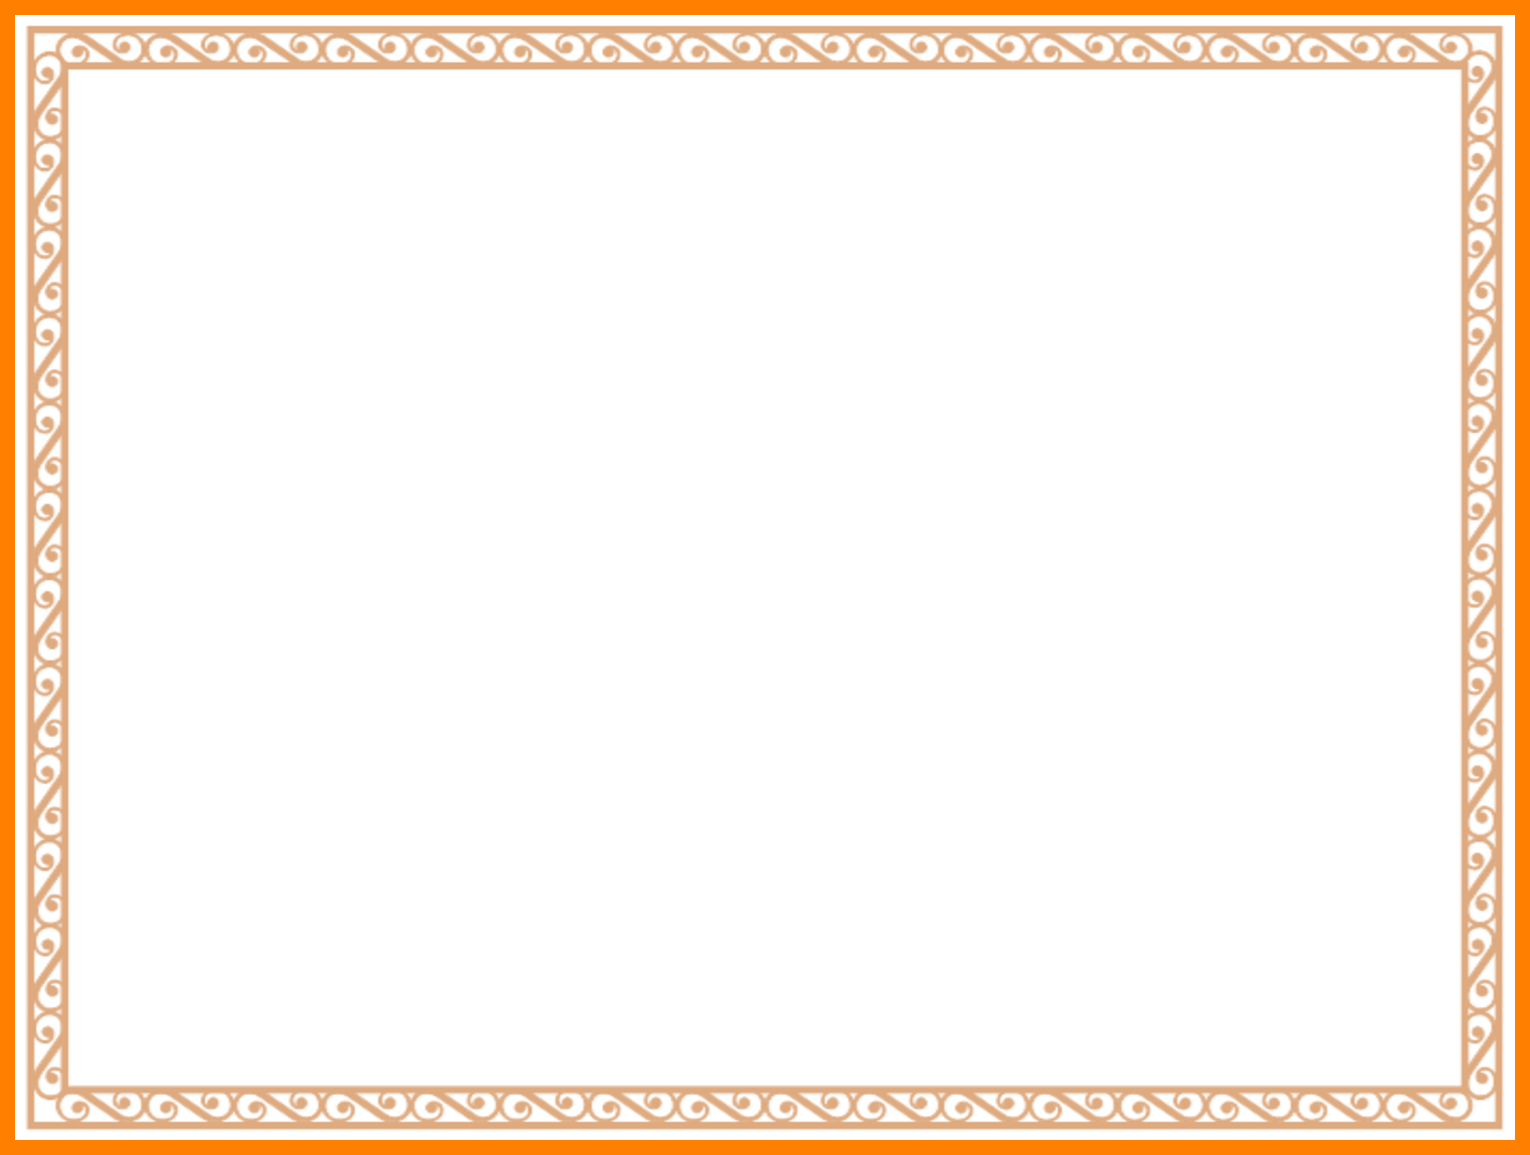 Certificate Border Png Hd.free Printable Blank Certificate Borders  Clipart Library Certificate Border Clip Art 1500_1125.png - Boder, Transparent background PNG HD thumbnail